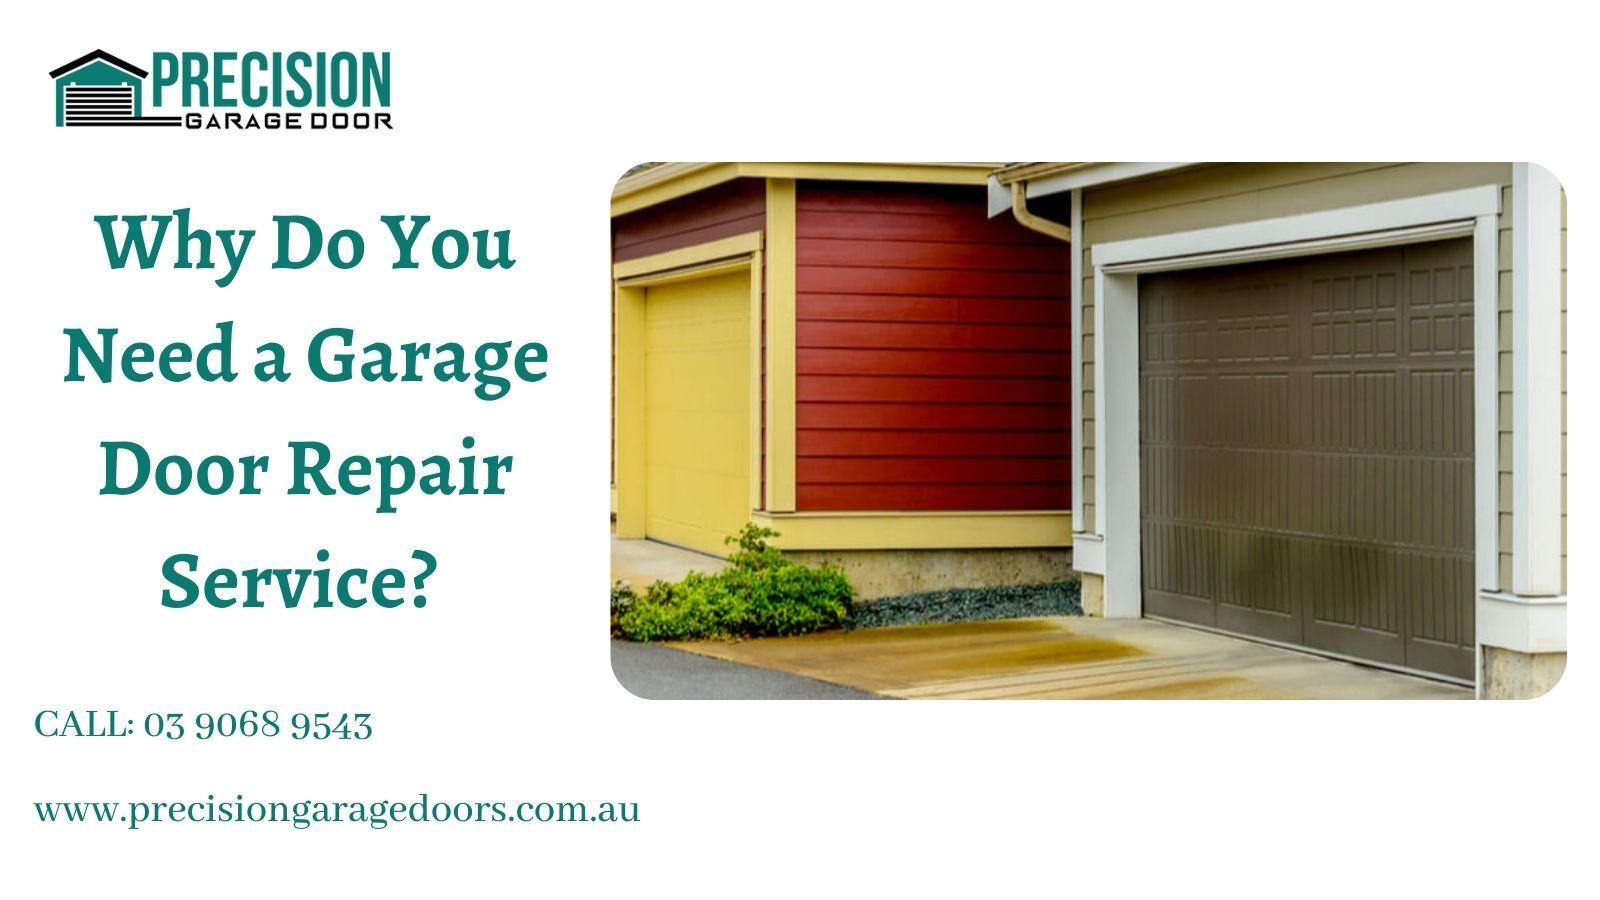 Why Do You Need a Garage Door Repair Service